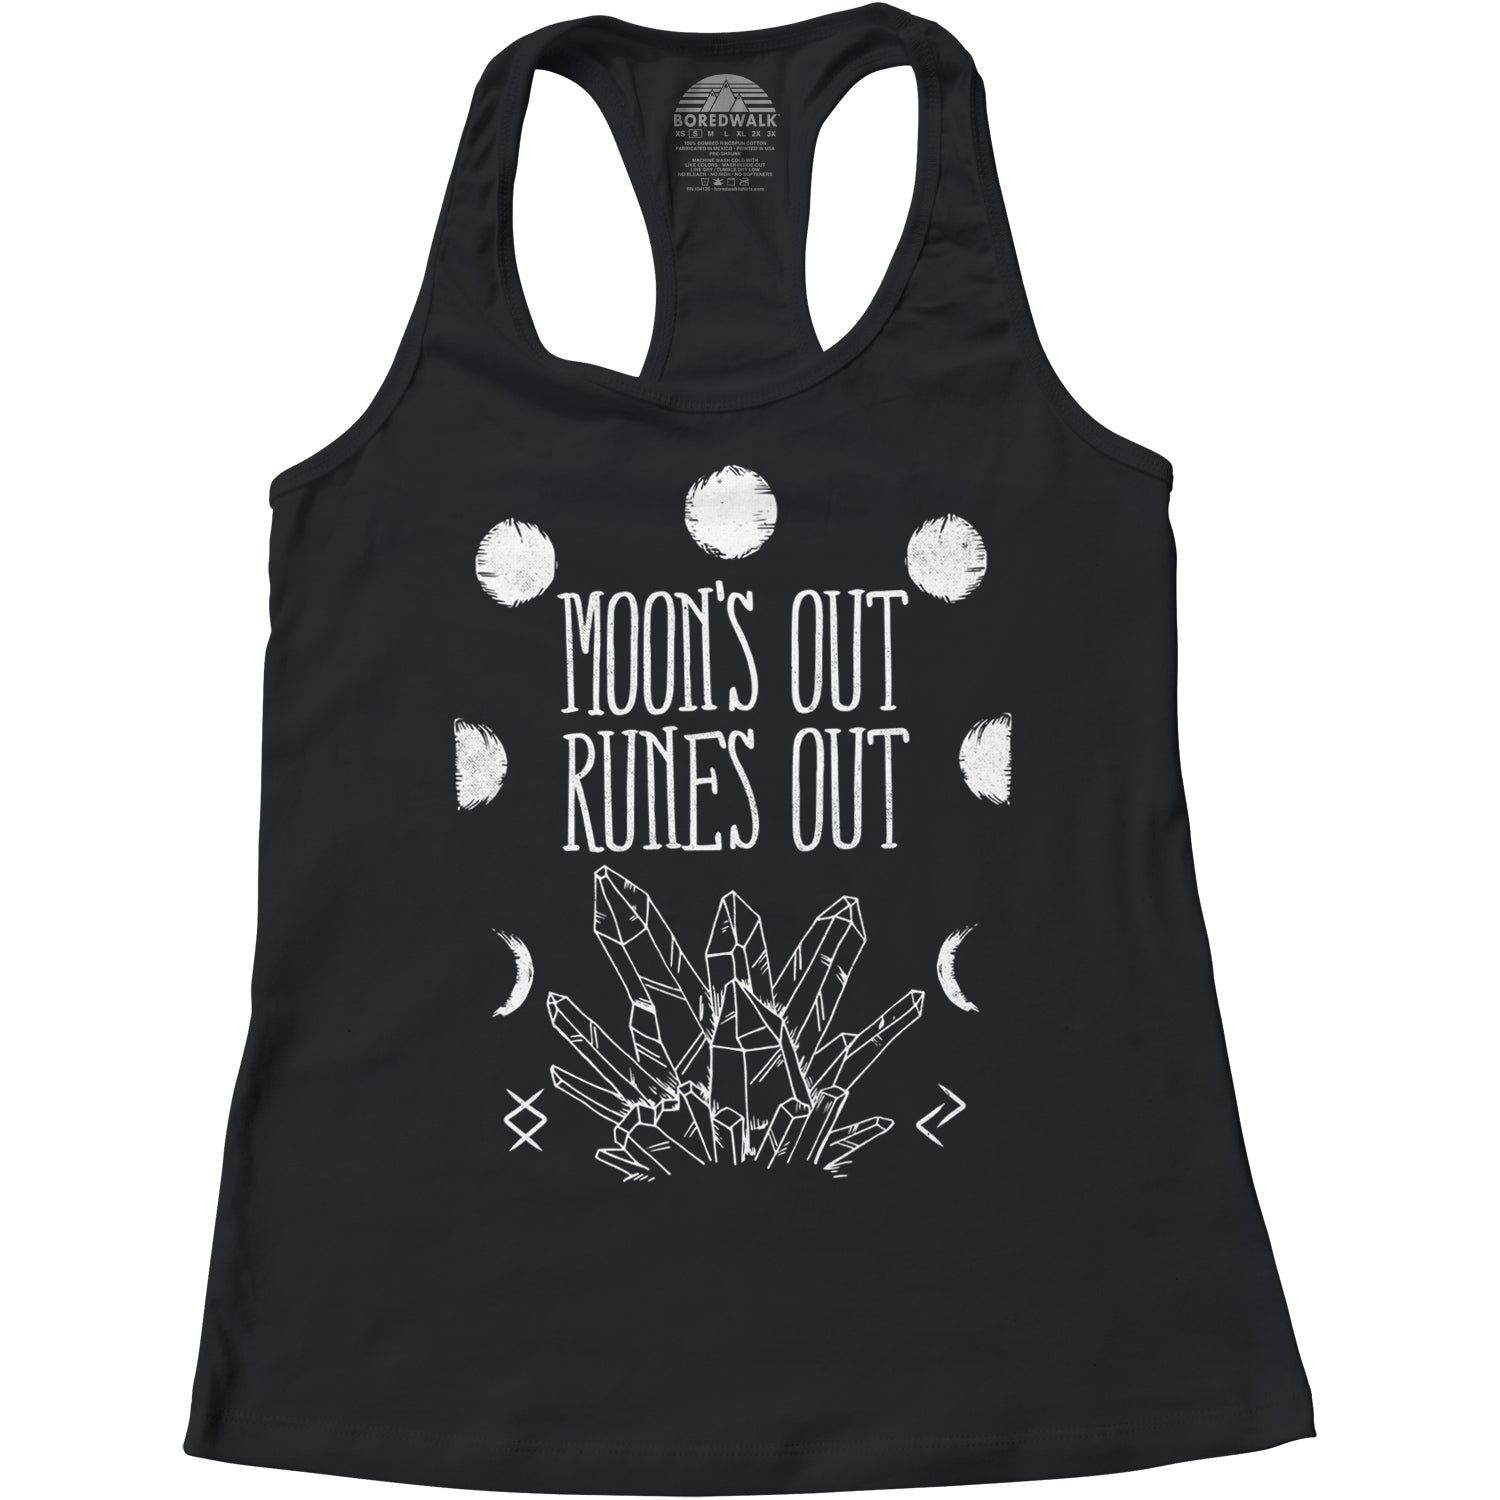 Women's Moon's Out Runes Out Racerback Tank Top